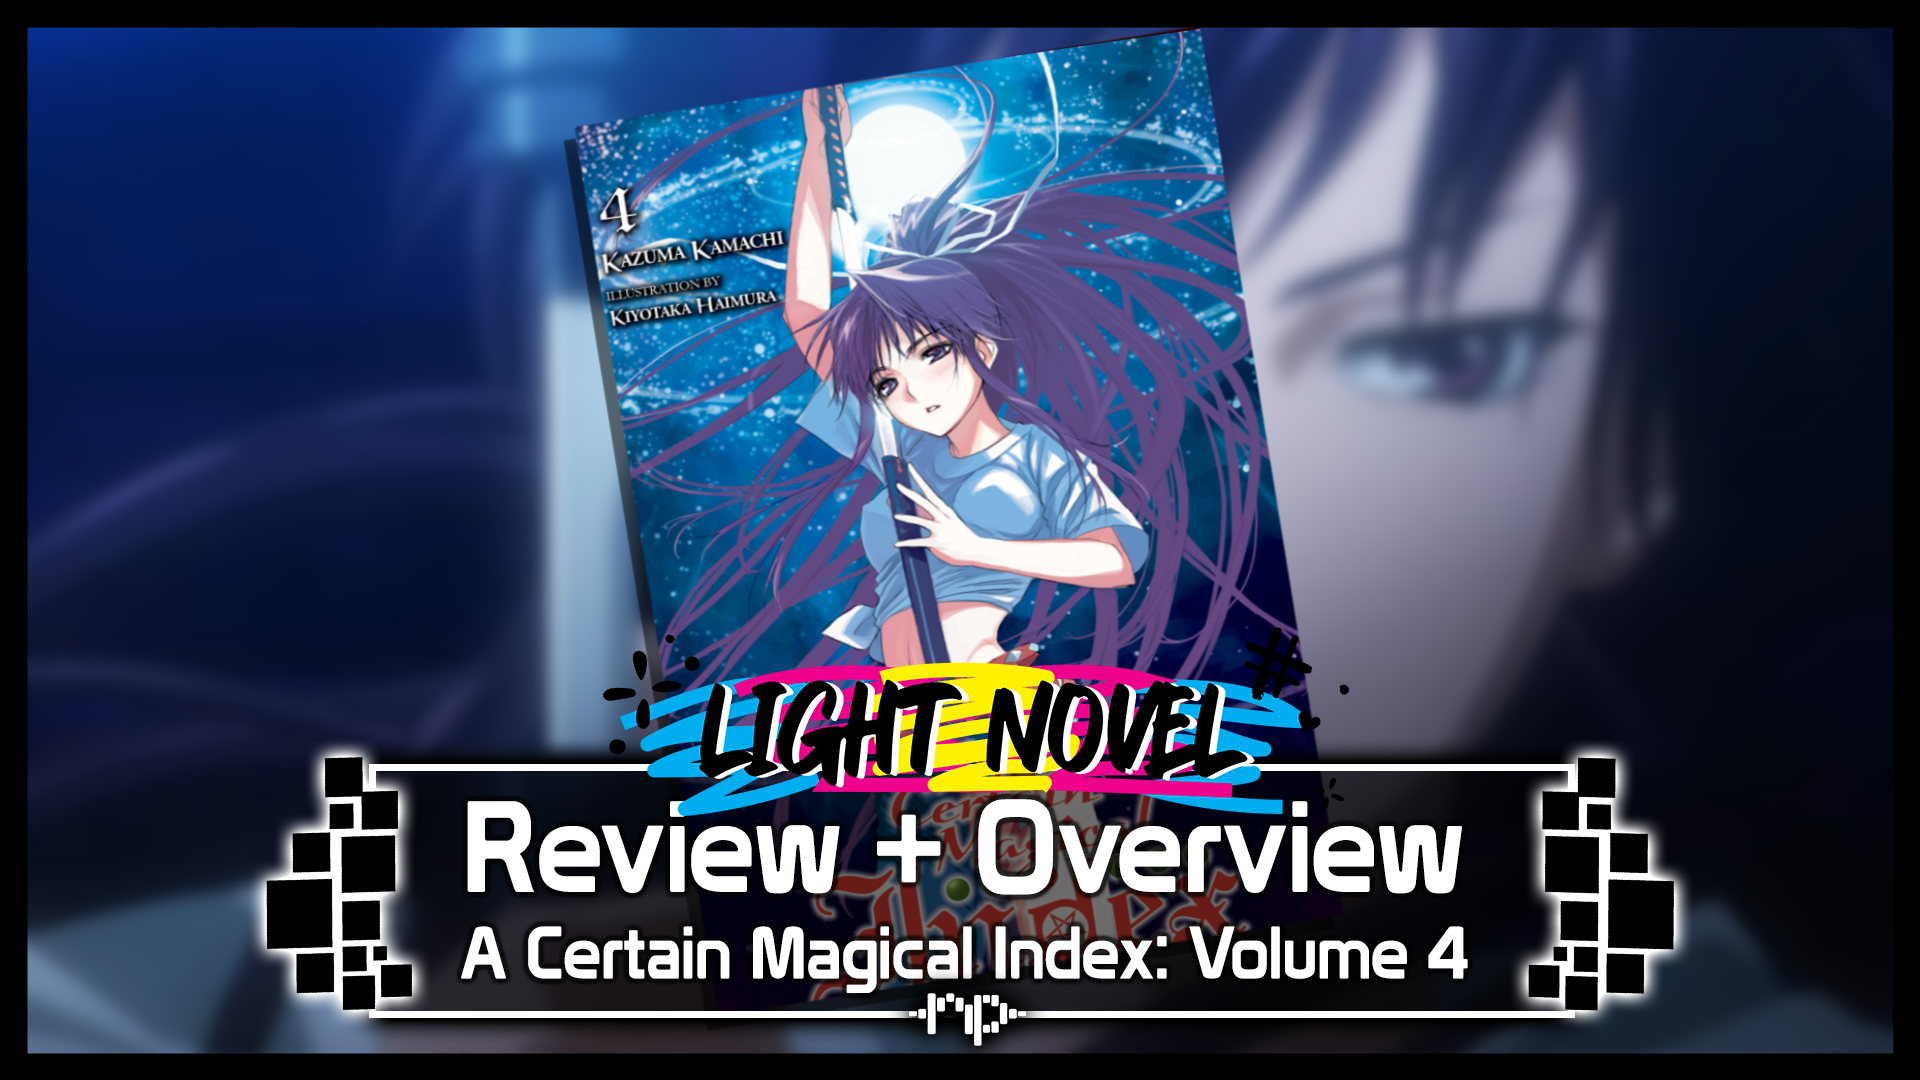 A Certain Magical Index Vol. 4 Review + Overview — Angel Fall Arc — God, Serial Killer & Body Swapping